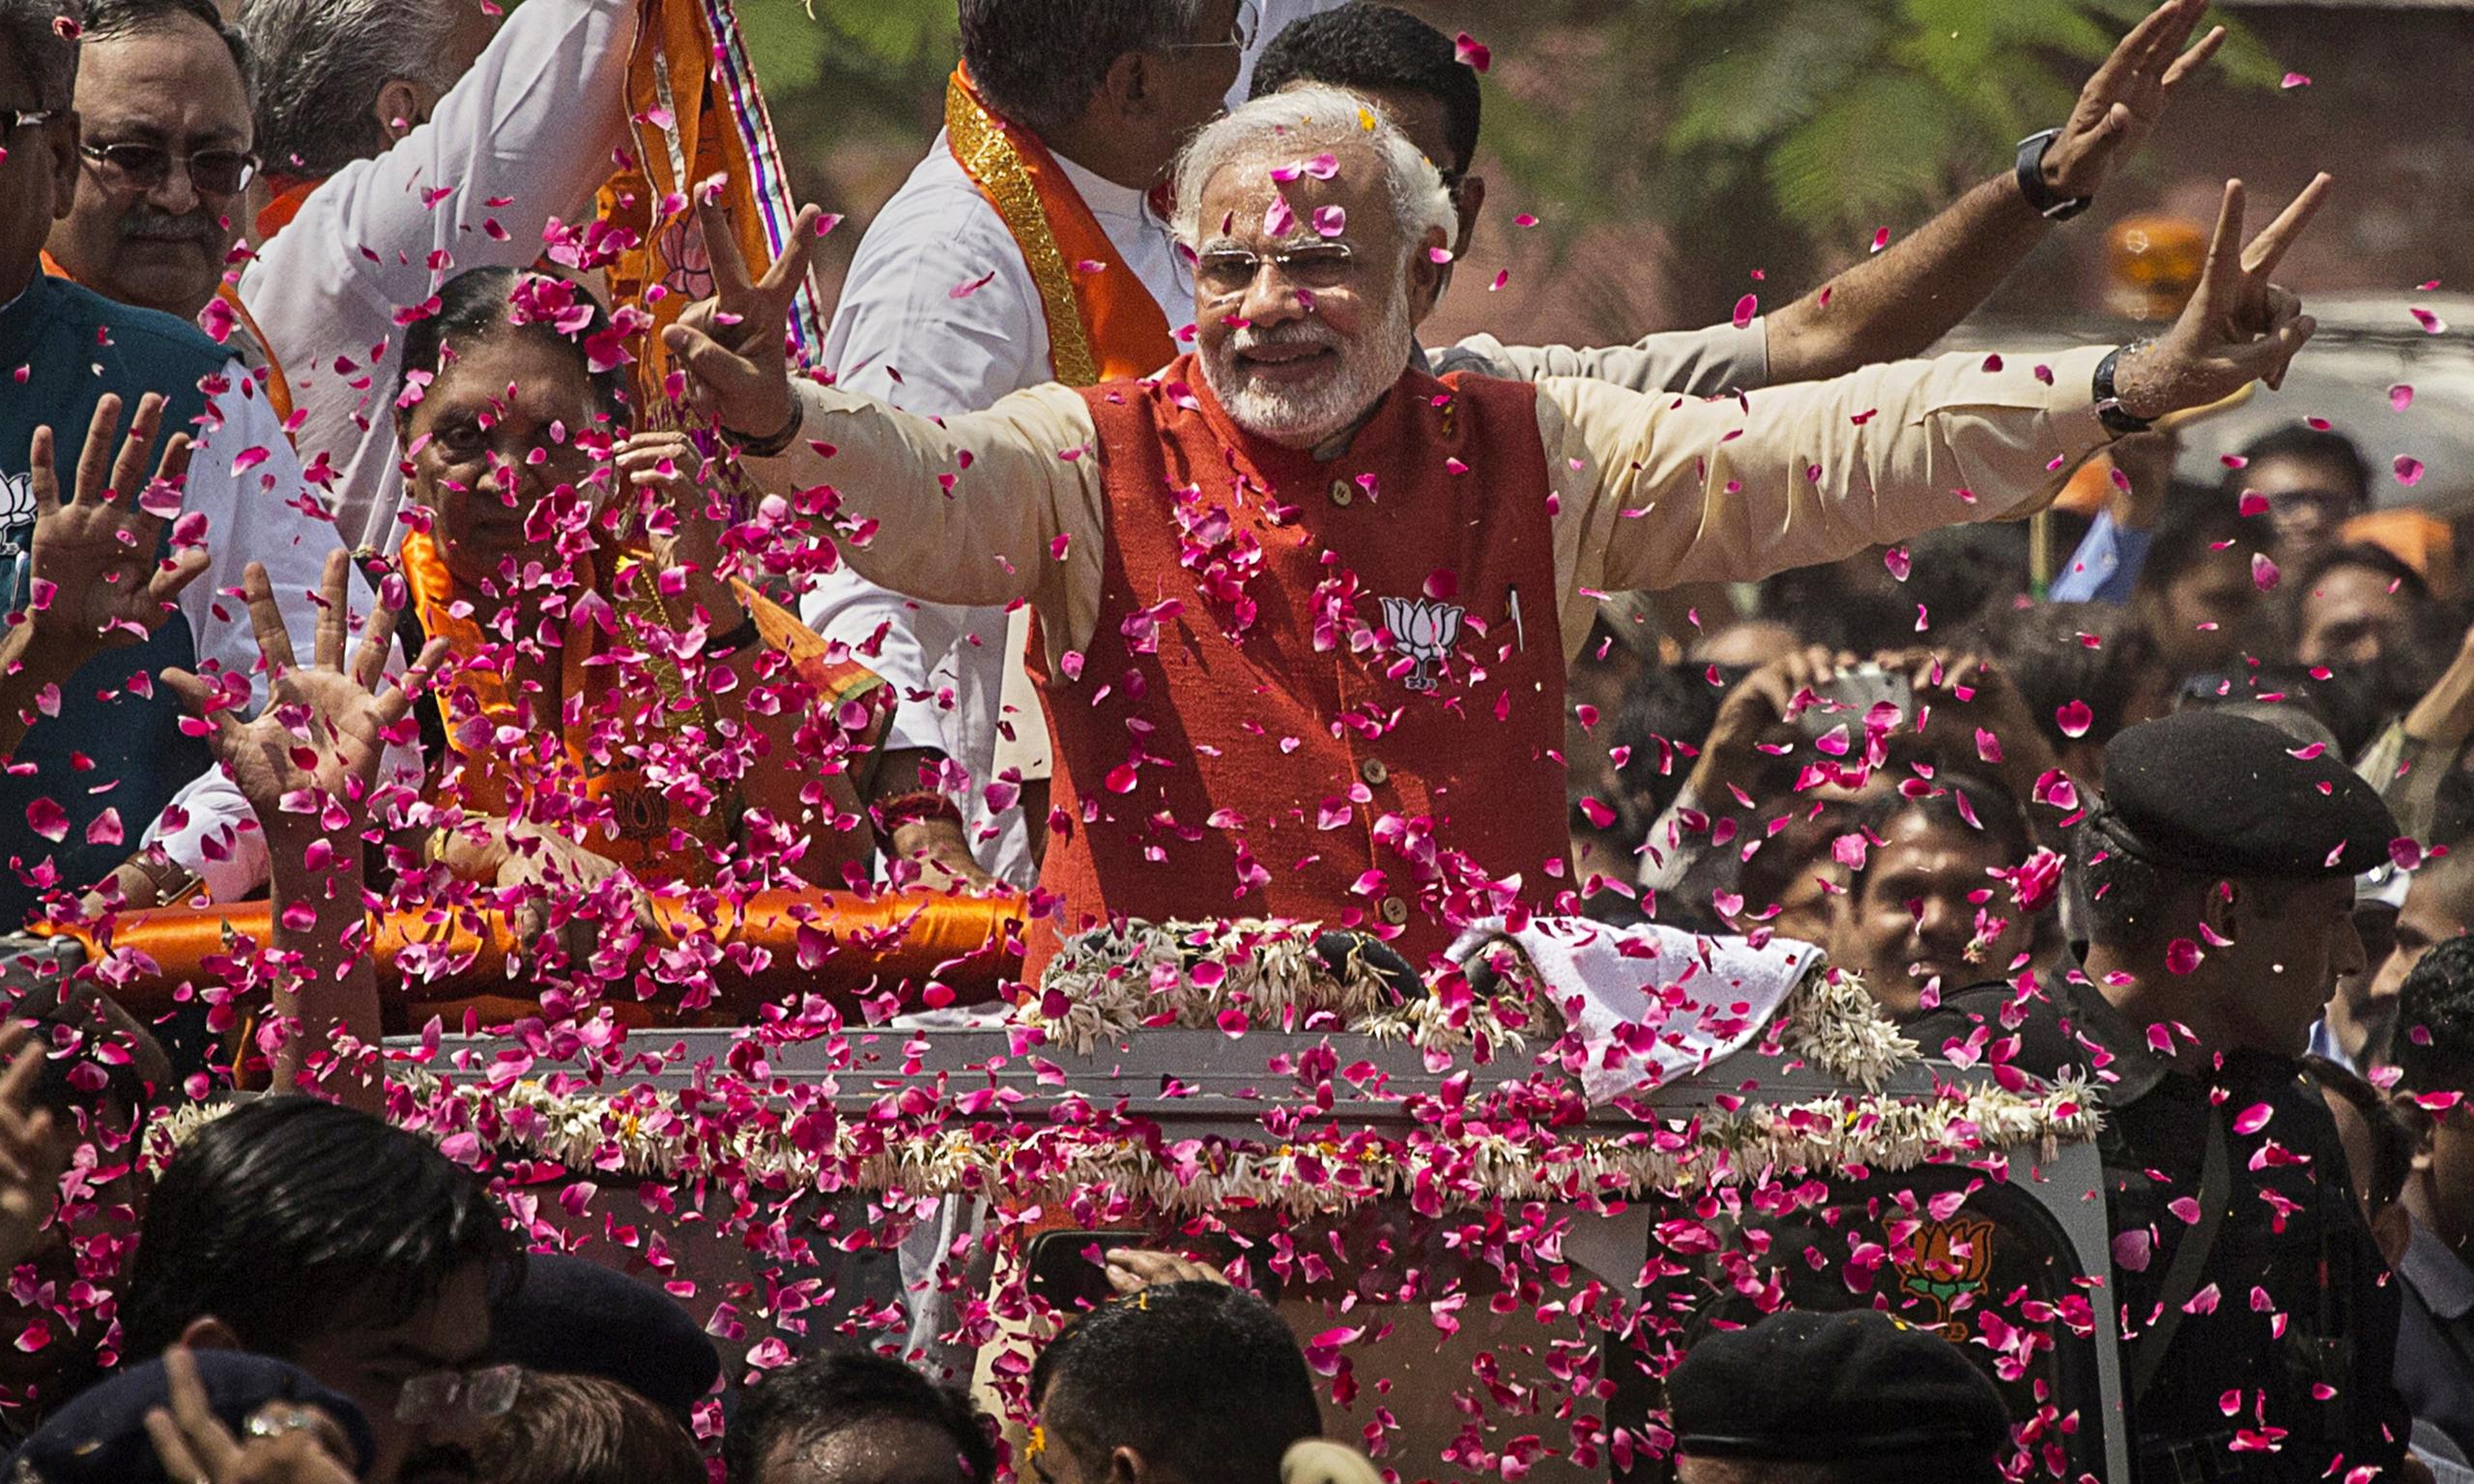 Narendra Modi Efforts To Clean Varanasi Are Working. However, There Is Still Much To Be Done